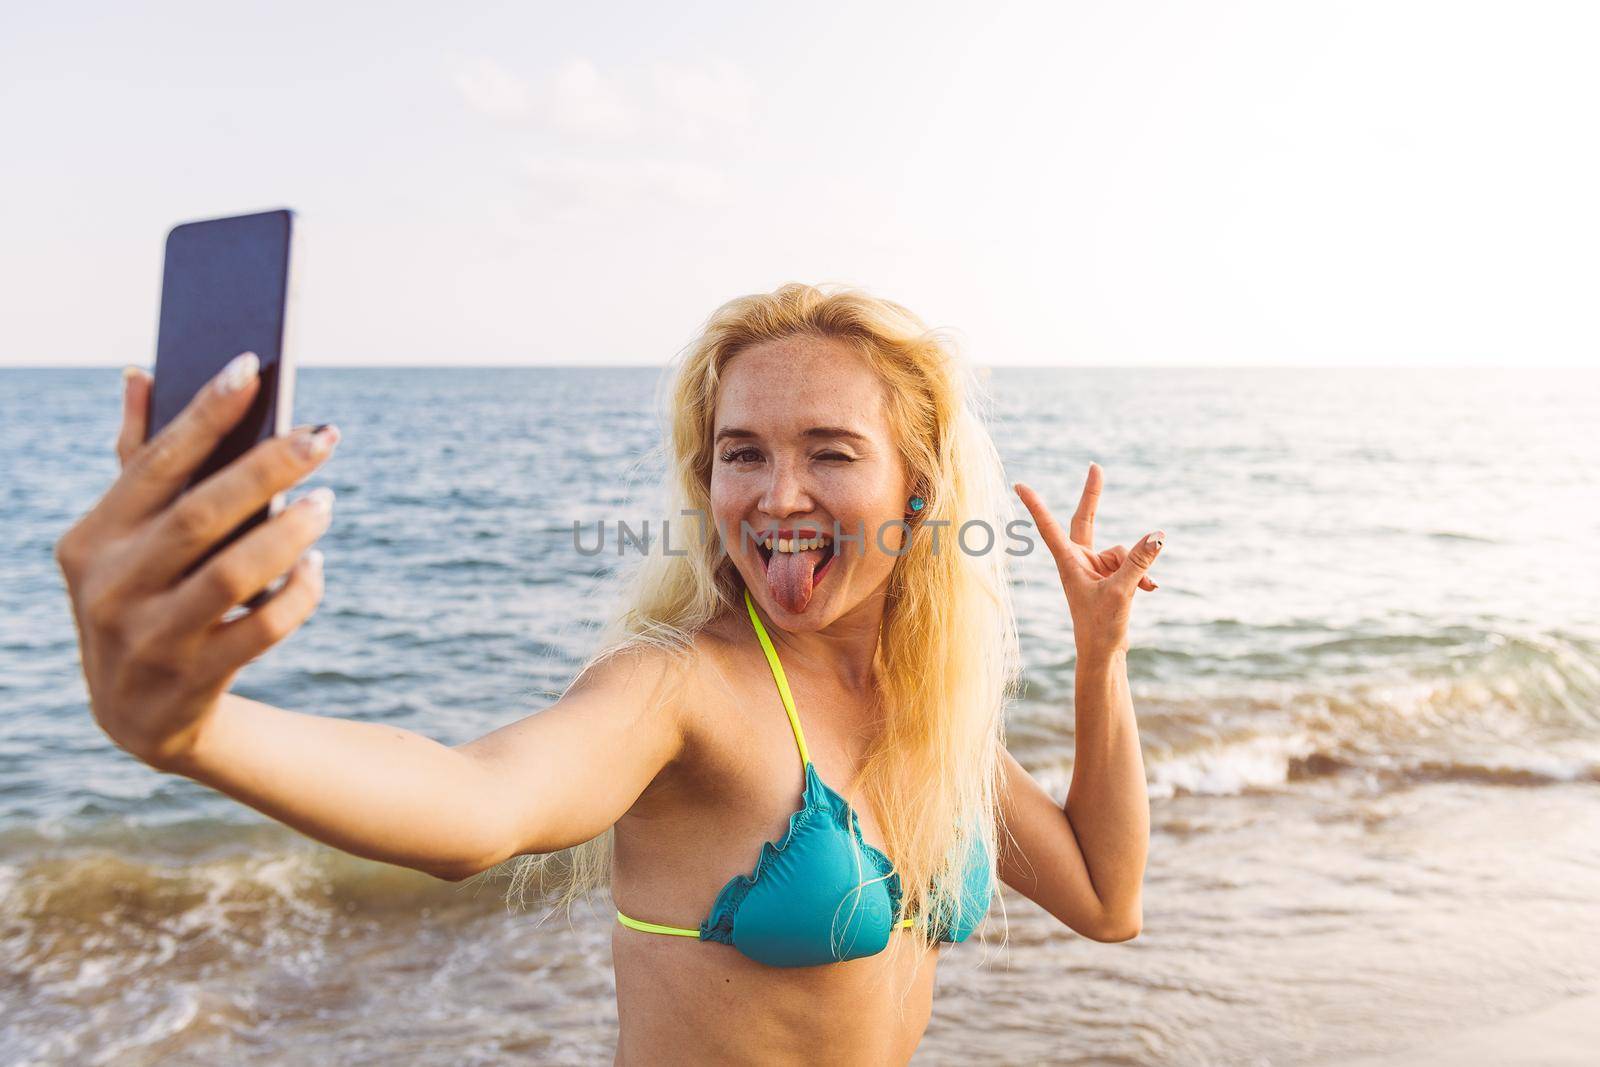 blonde woman taking a selfie photo with her mobile phone at beach at sunset on her summer vacation, communication and technology concept